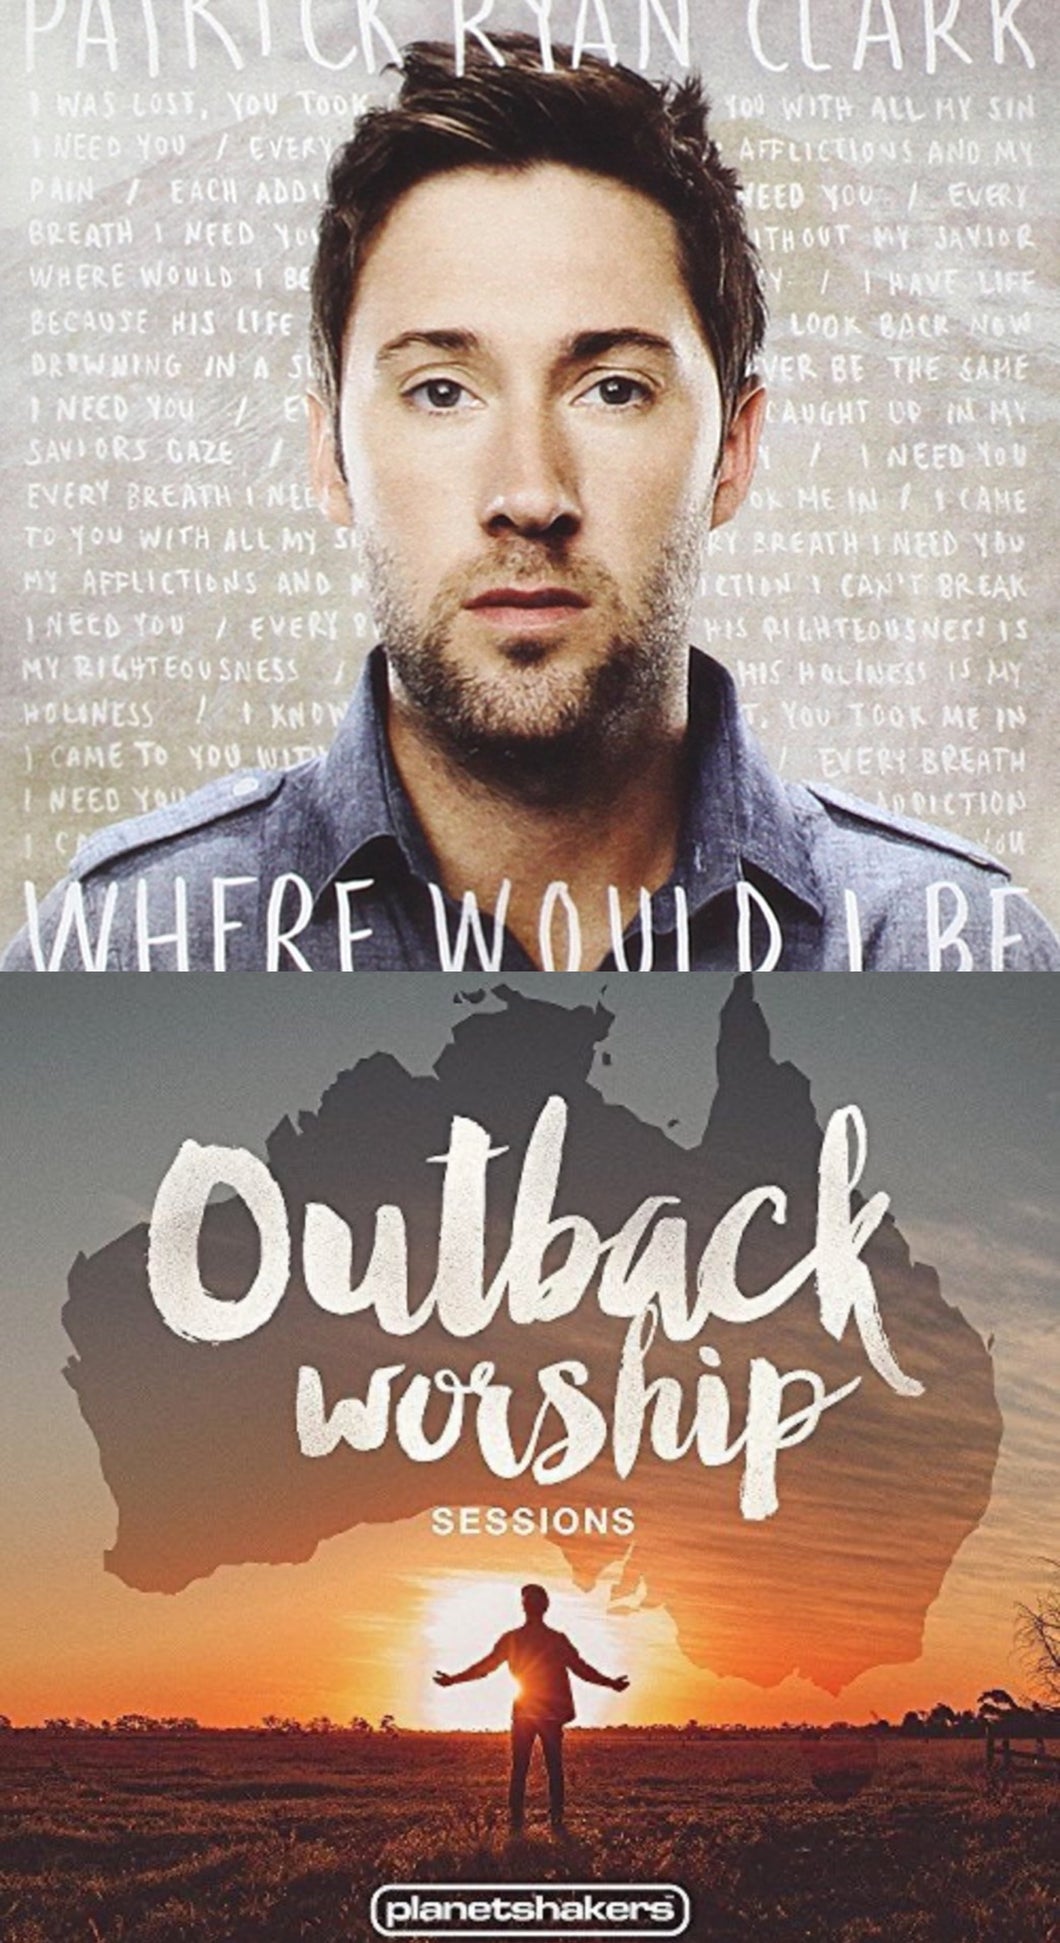 Patrick Ryan Clark Where Would I Be + Planetshakers The Outback Sessions 2CD